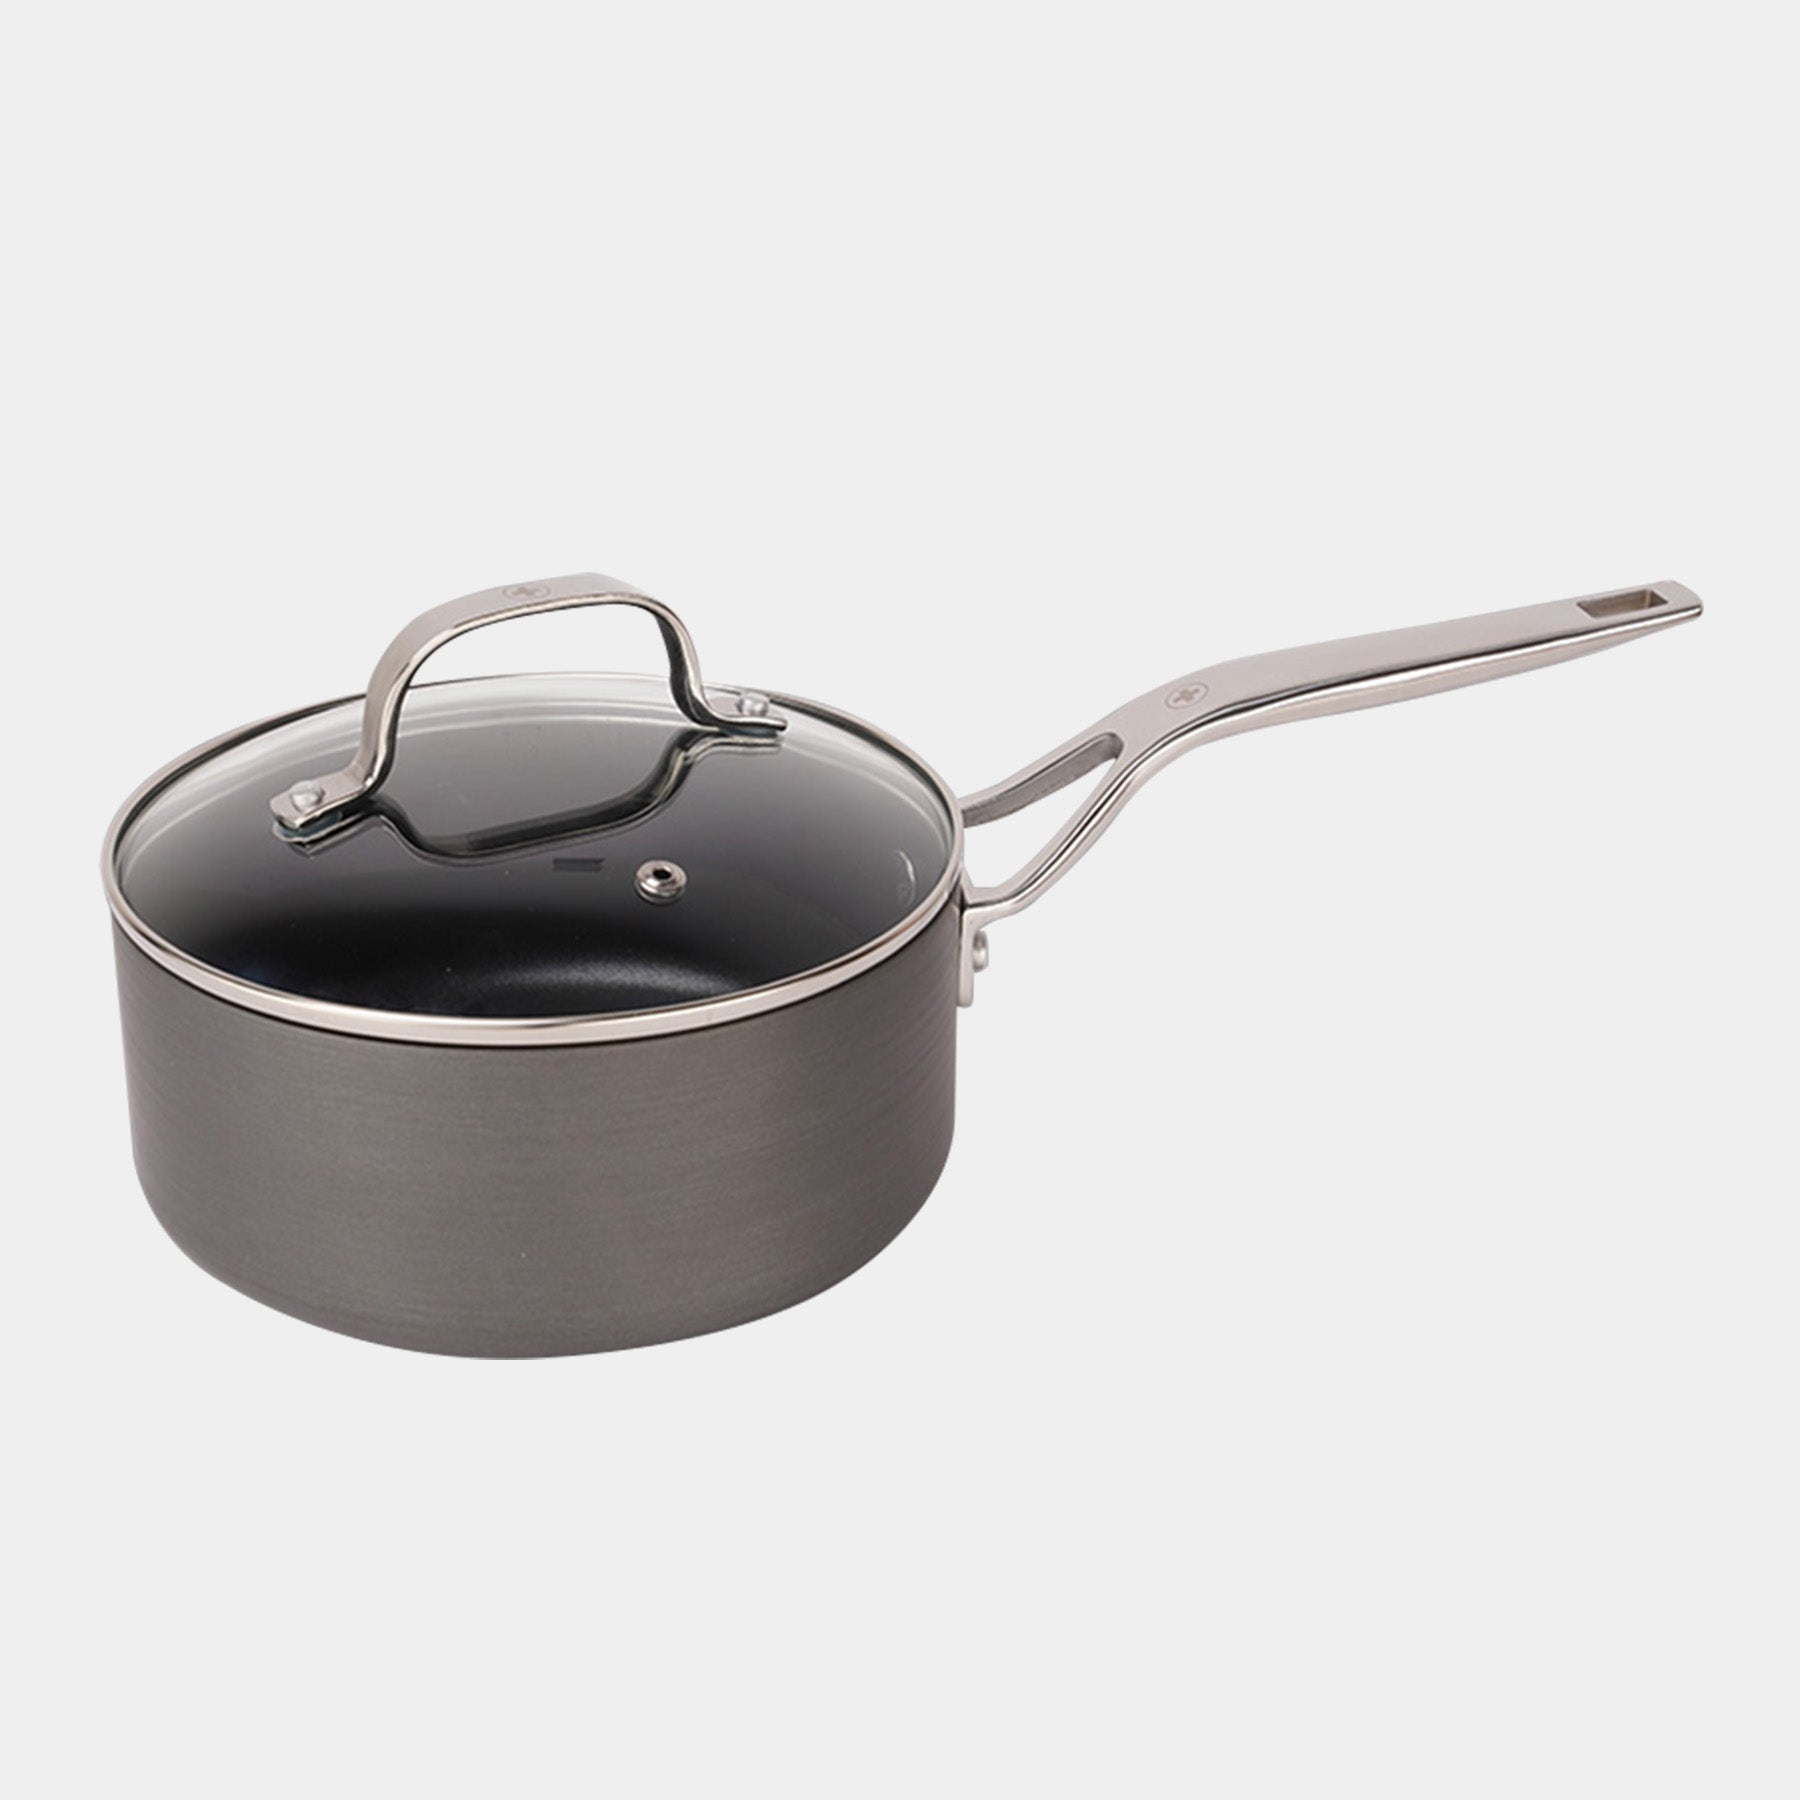 Hard Anodised 3 qt Saucepan with Glass Lid - Induction